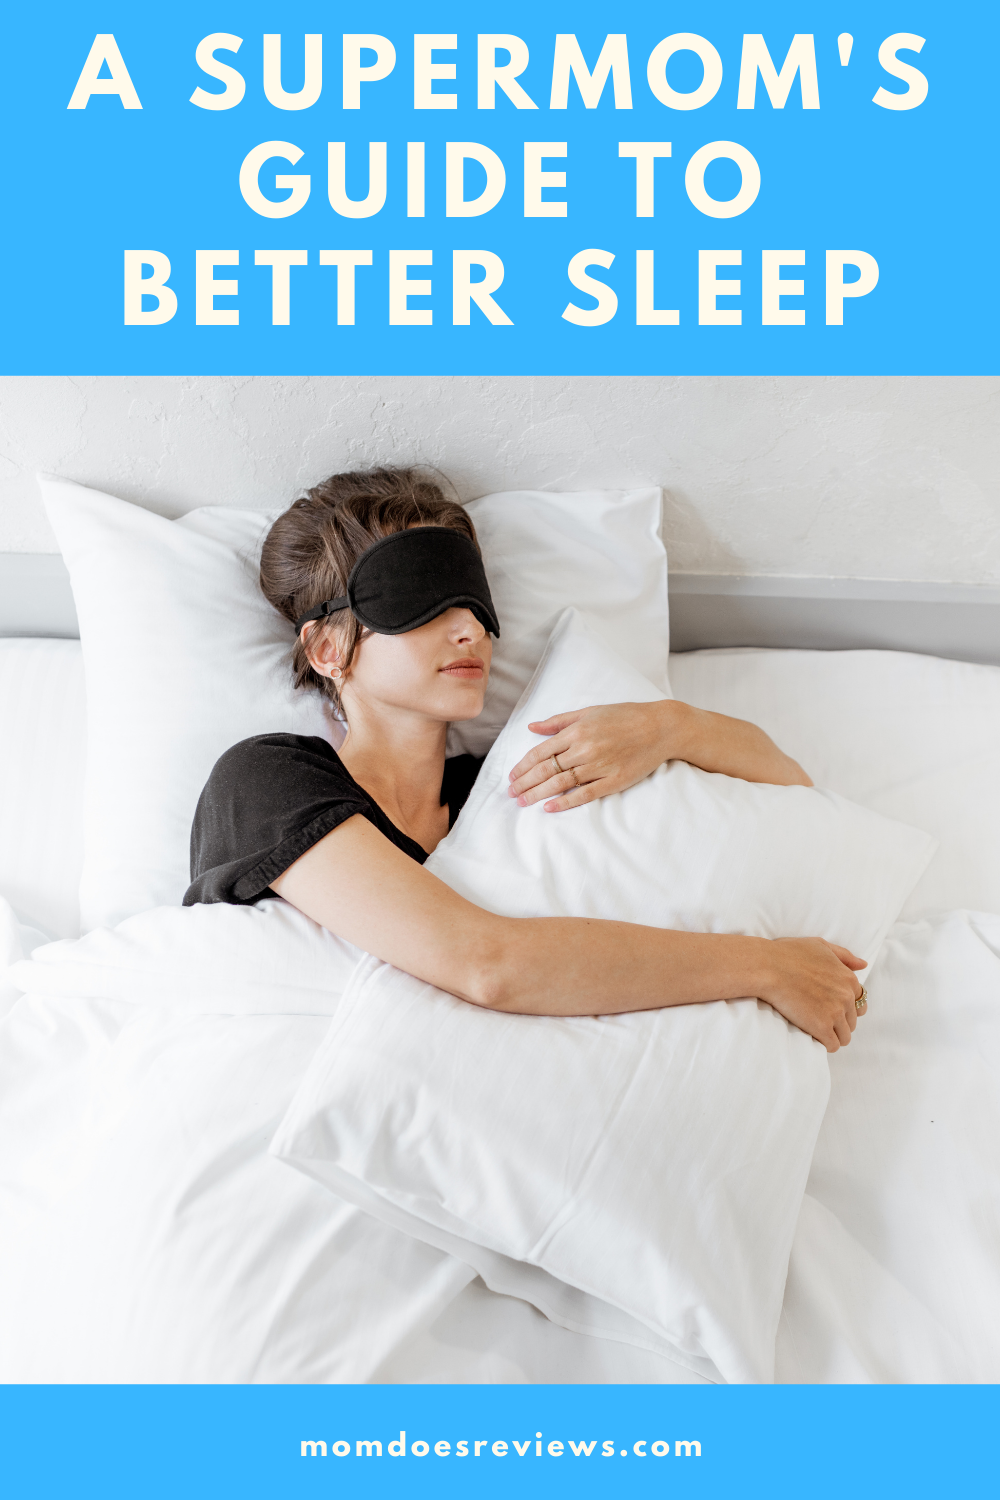 A Supermom's Guide to Better Sleep: 5 Tips for Tossing-and-Turning-Free Nights